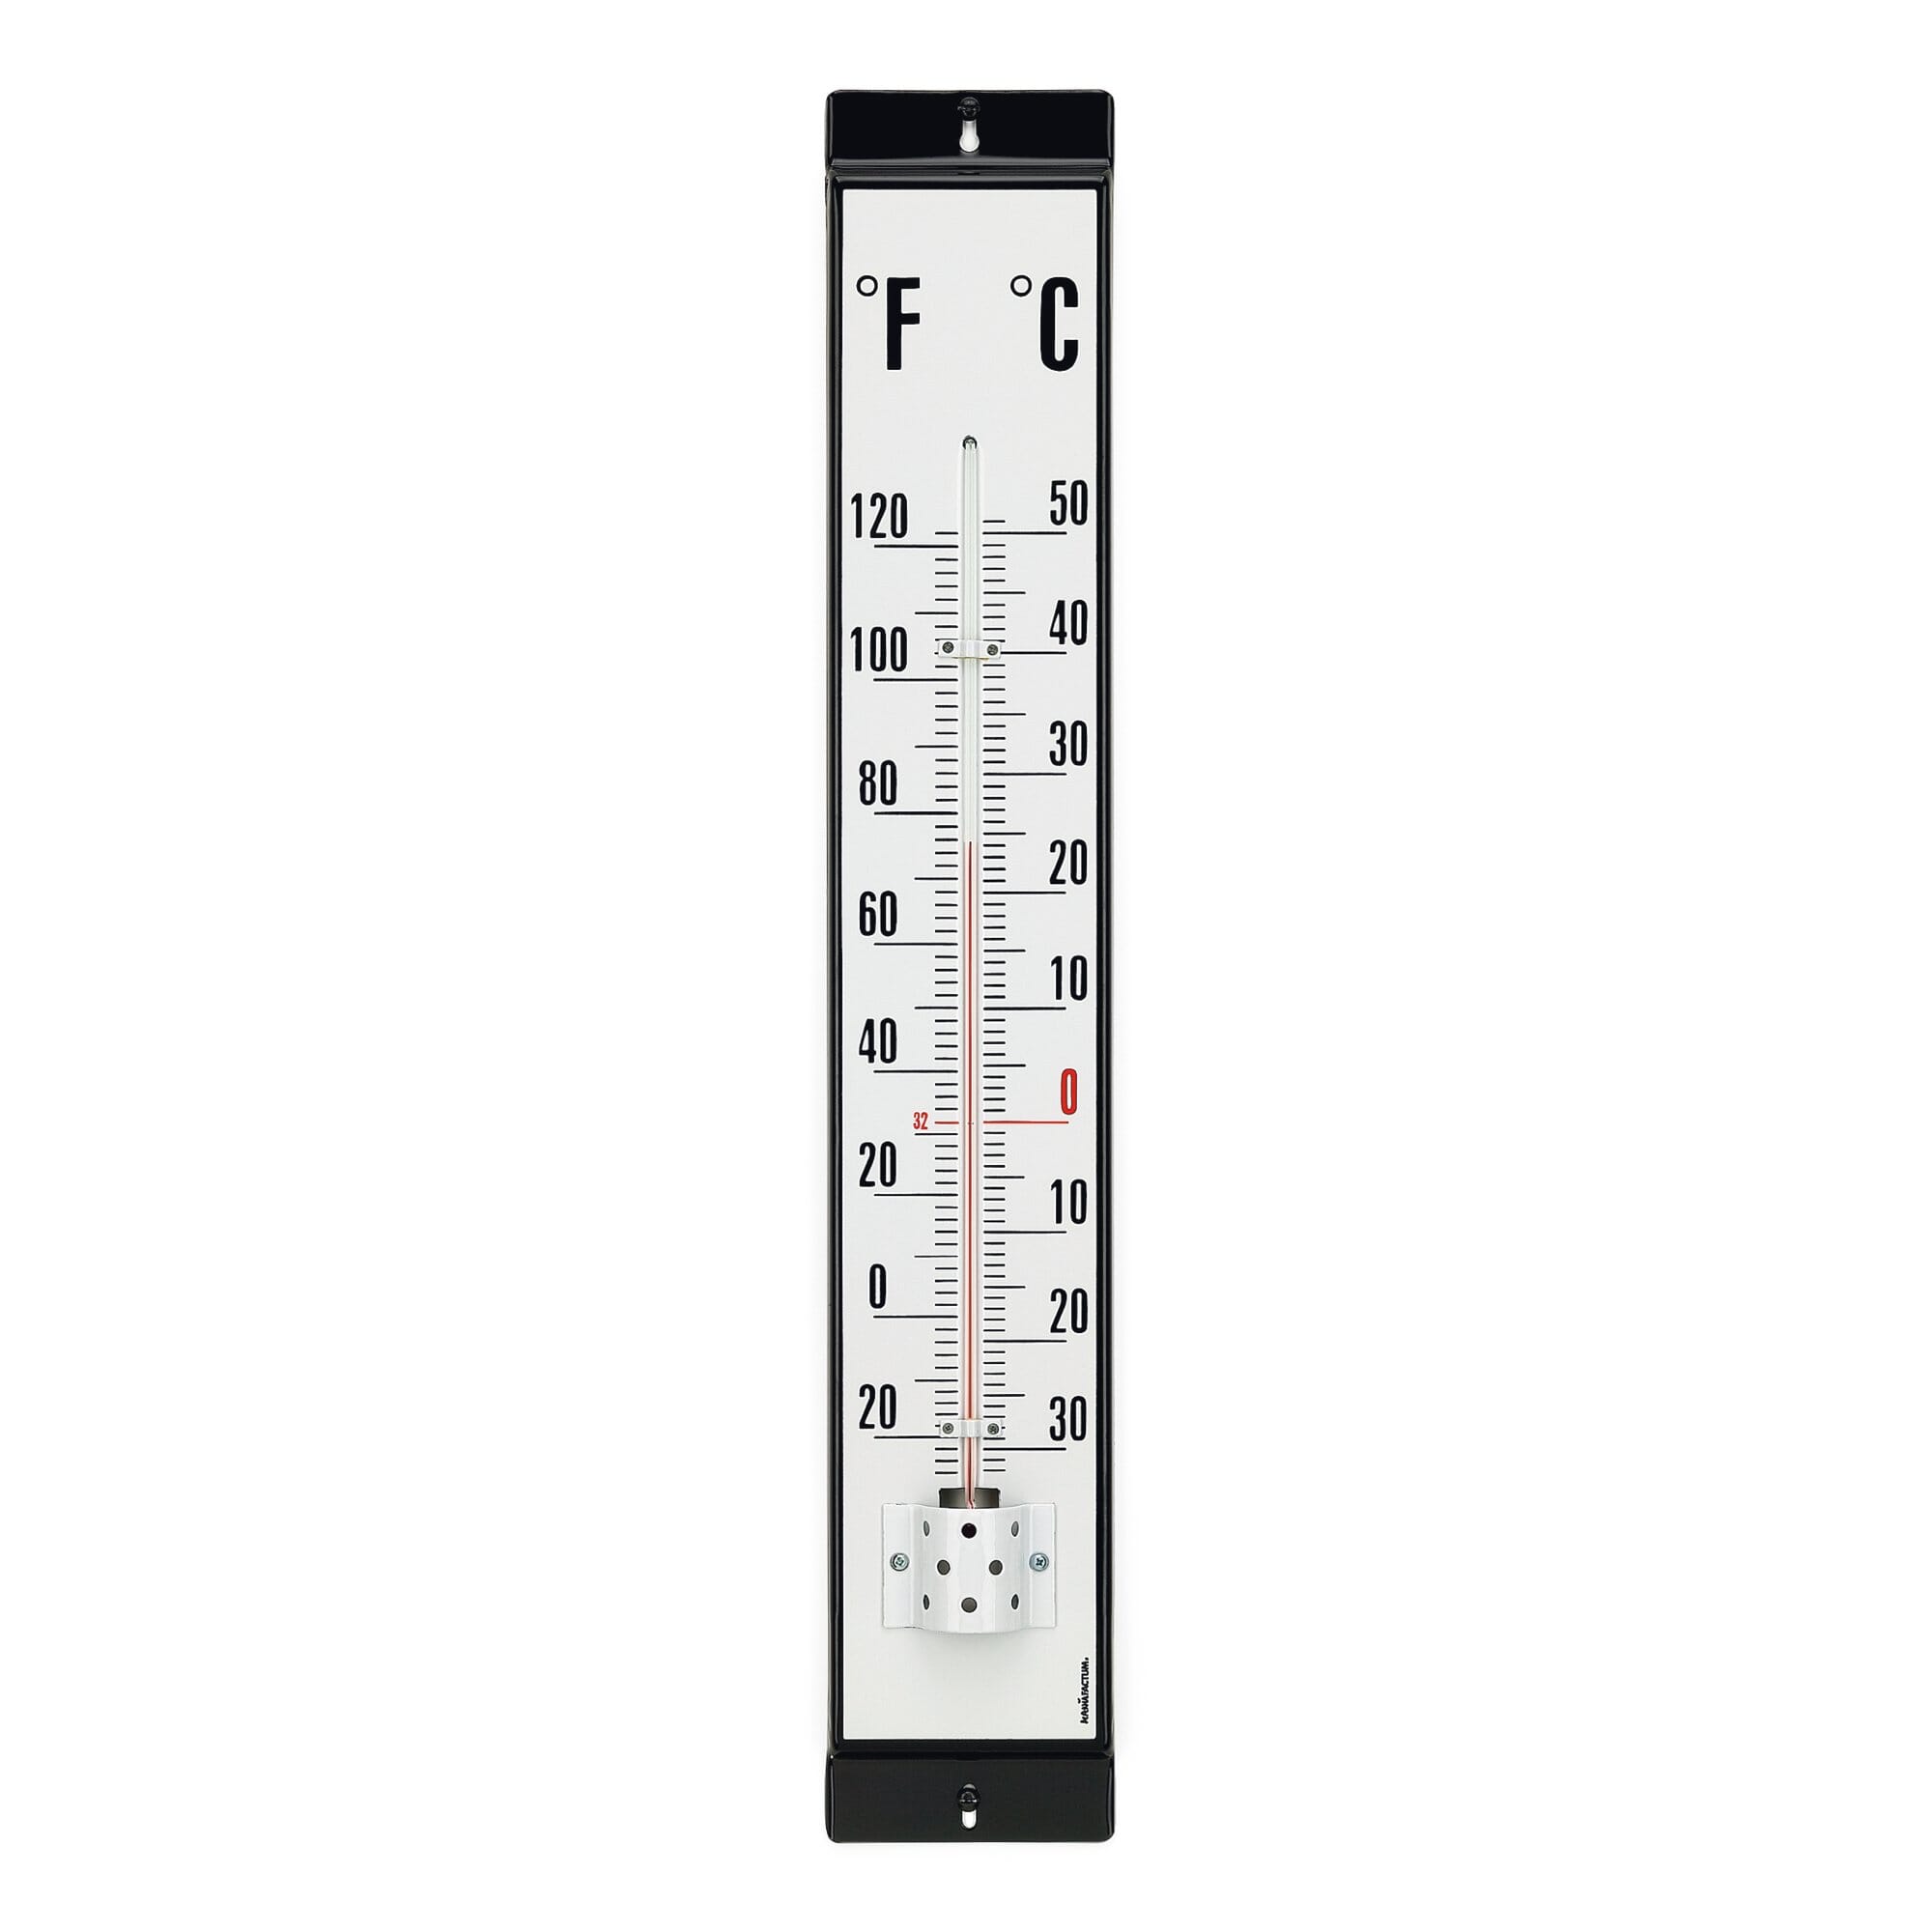 Outdoor weather station 801-48